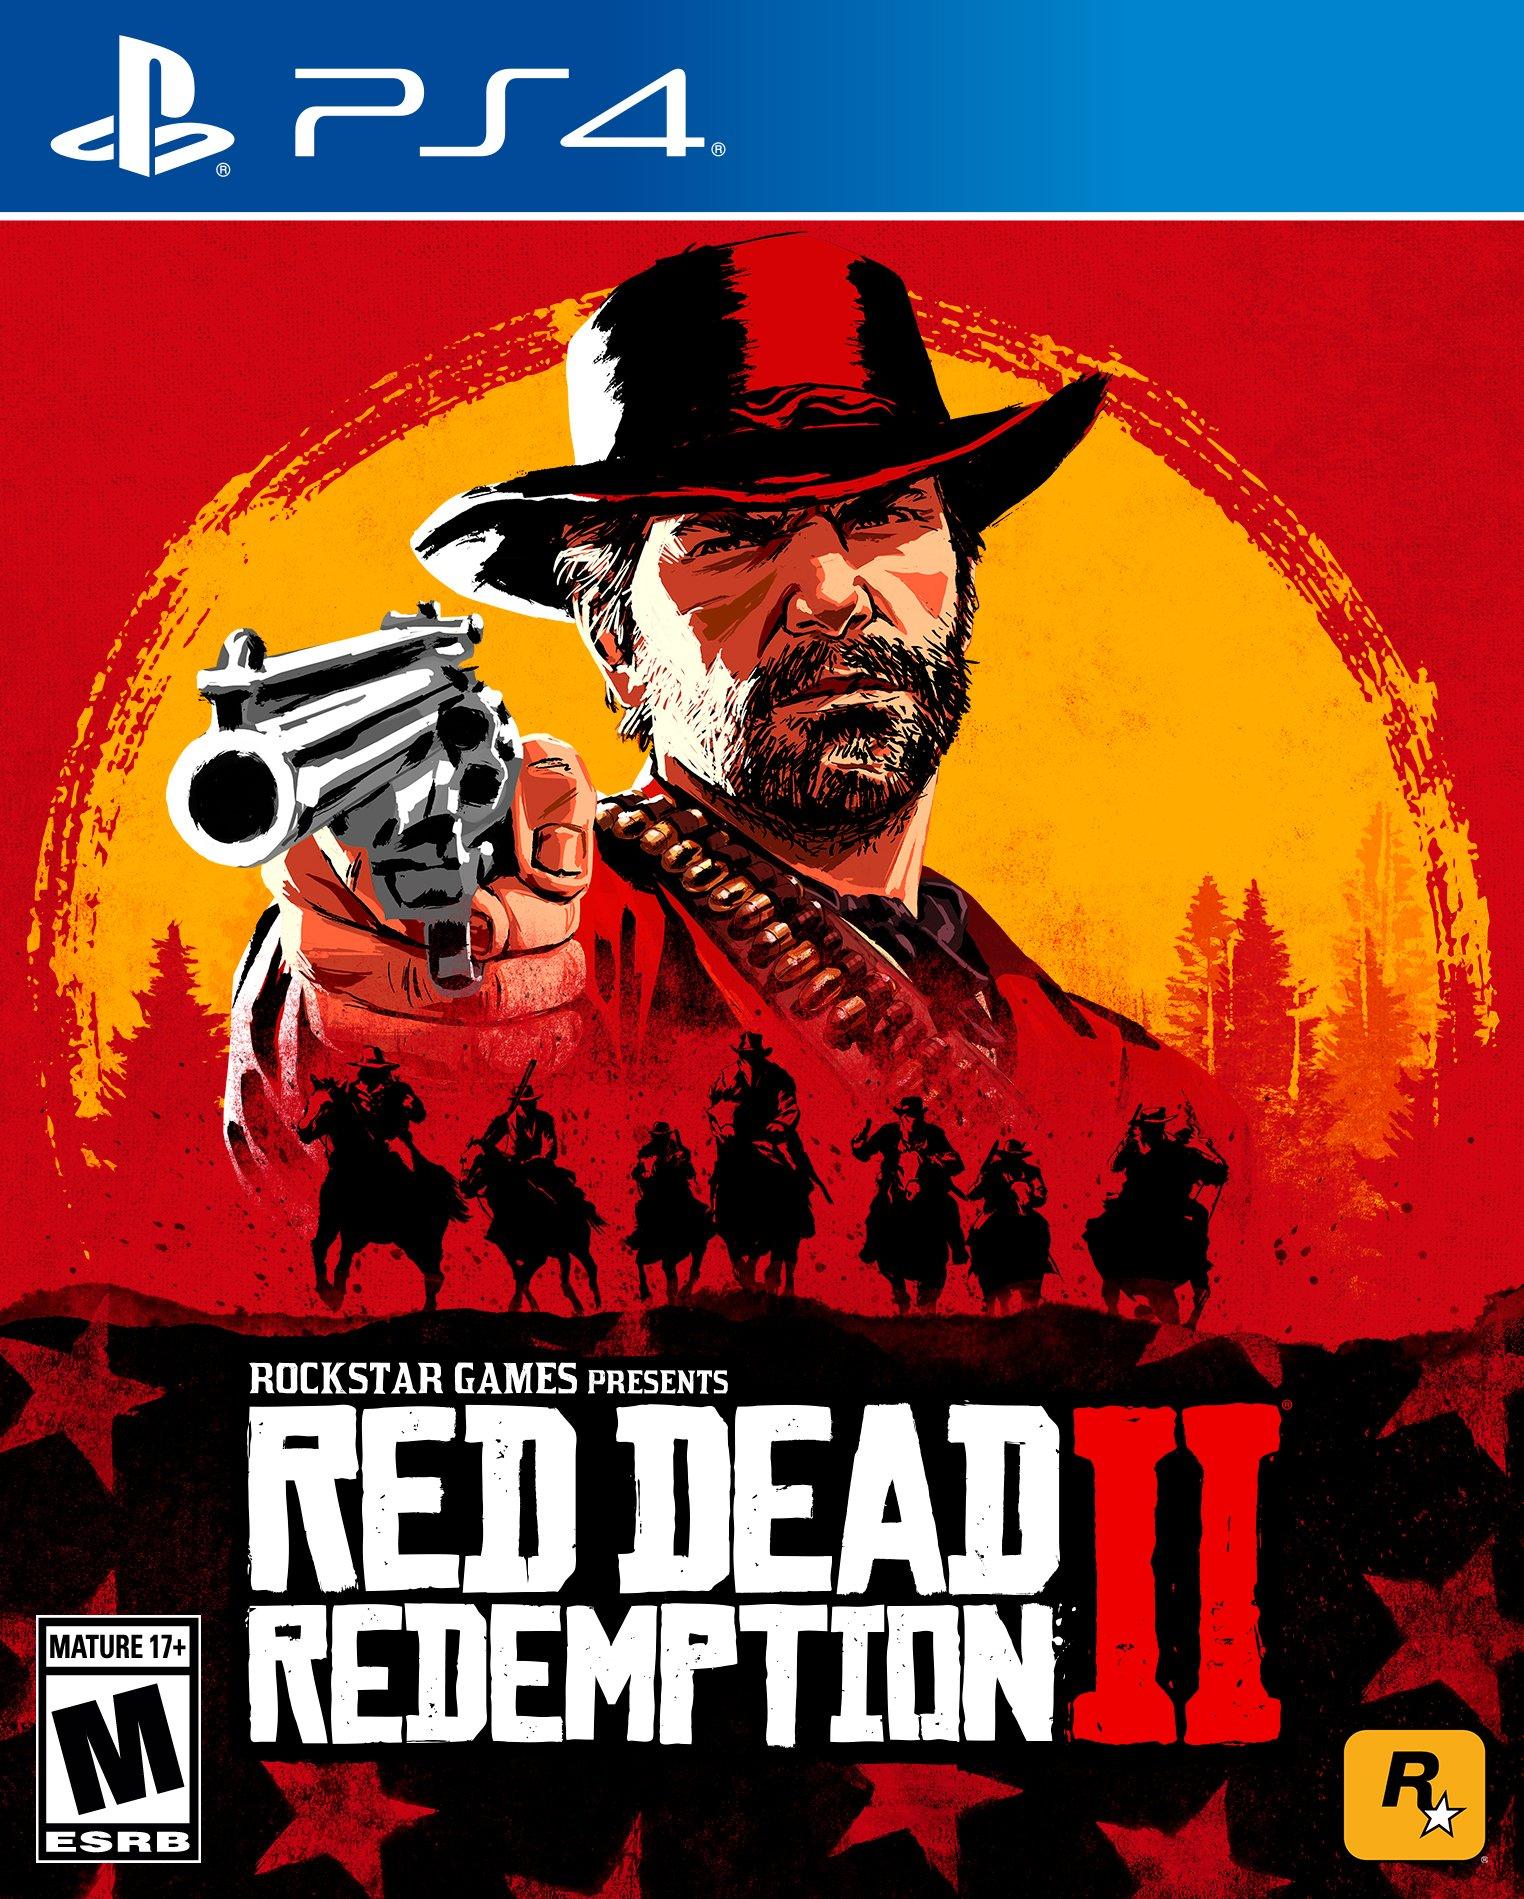 PS4 Red Dead Redemption 2 $29.99